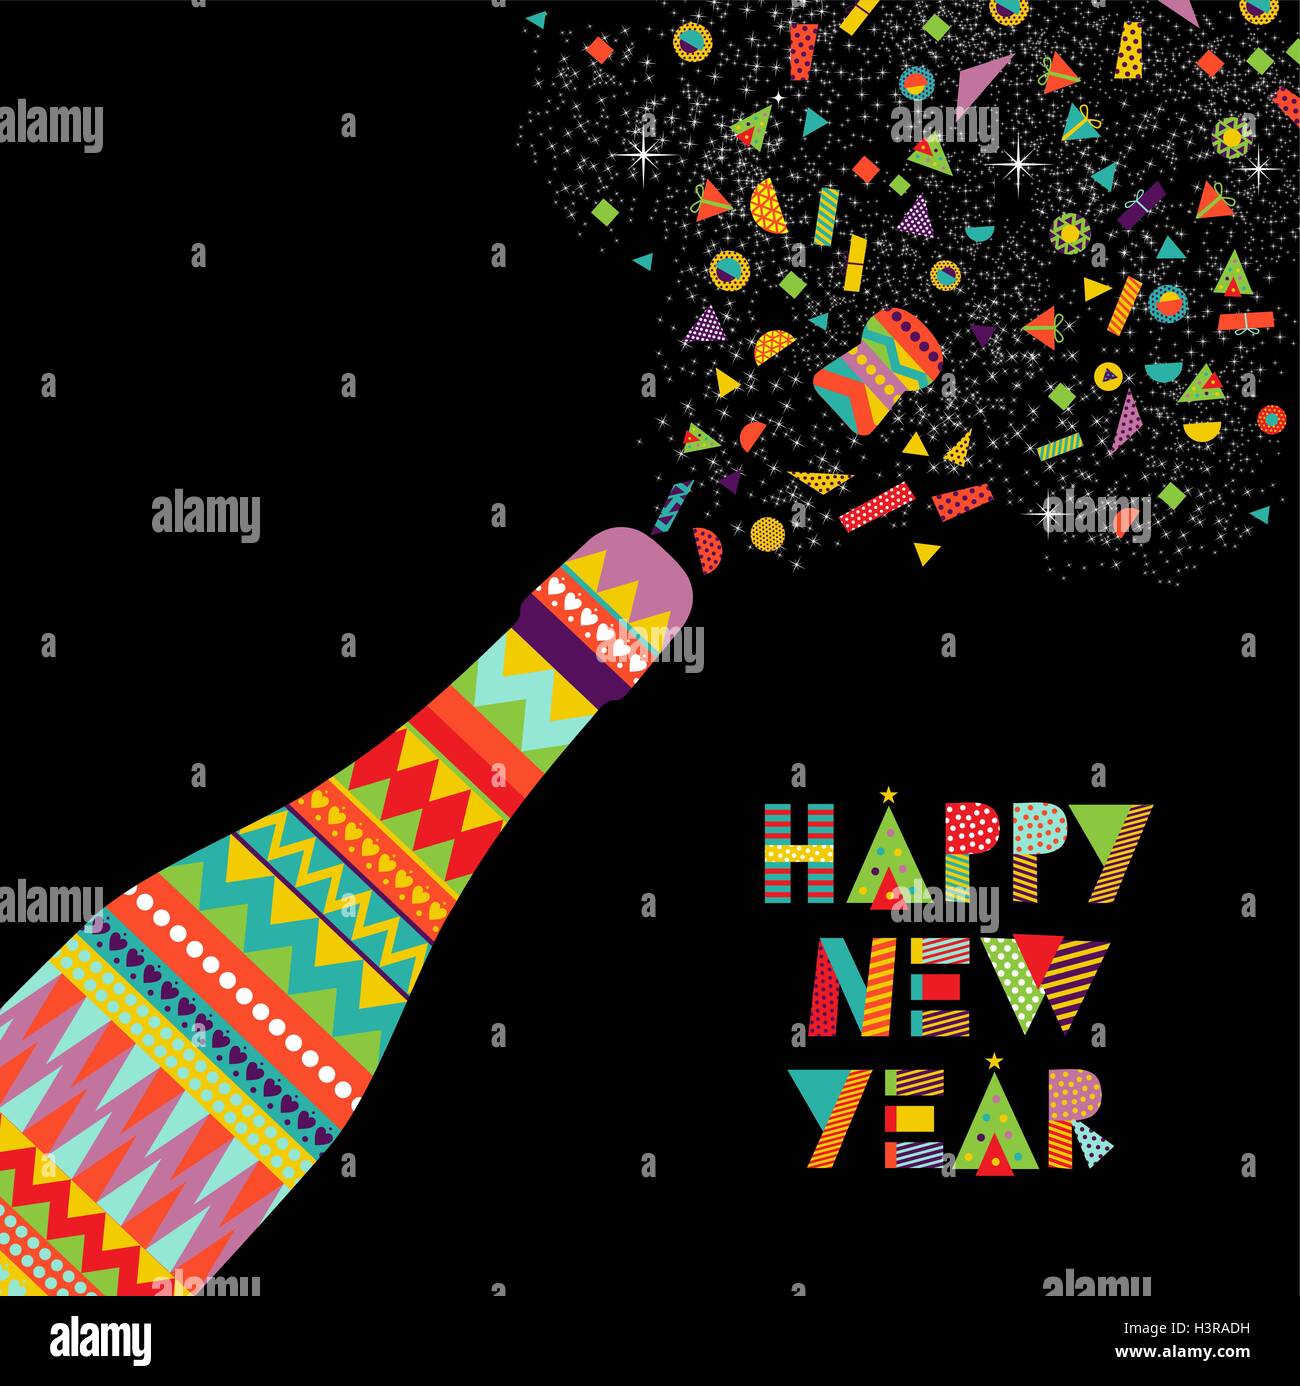 Fun Happy New Year card design party bottle making toast and colorful decoration. EPS10 vector. Stock Vector